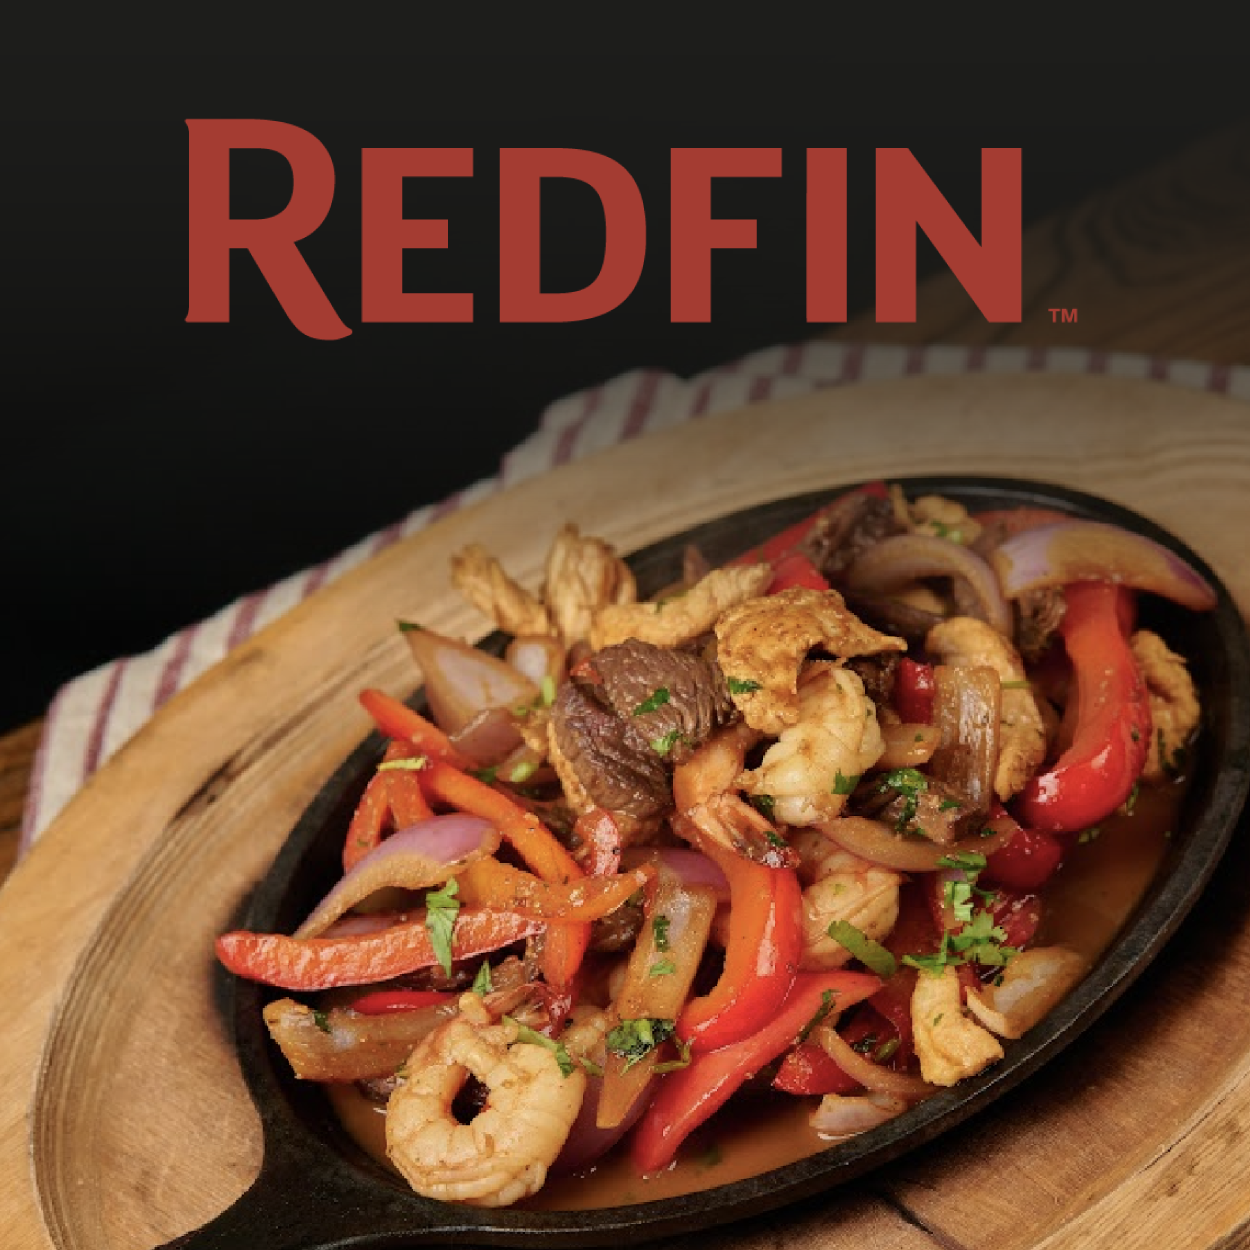 MUST TRY REDFIN HH